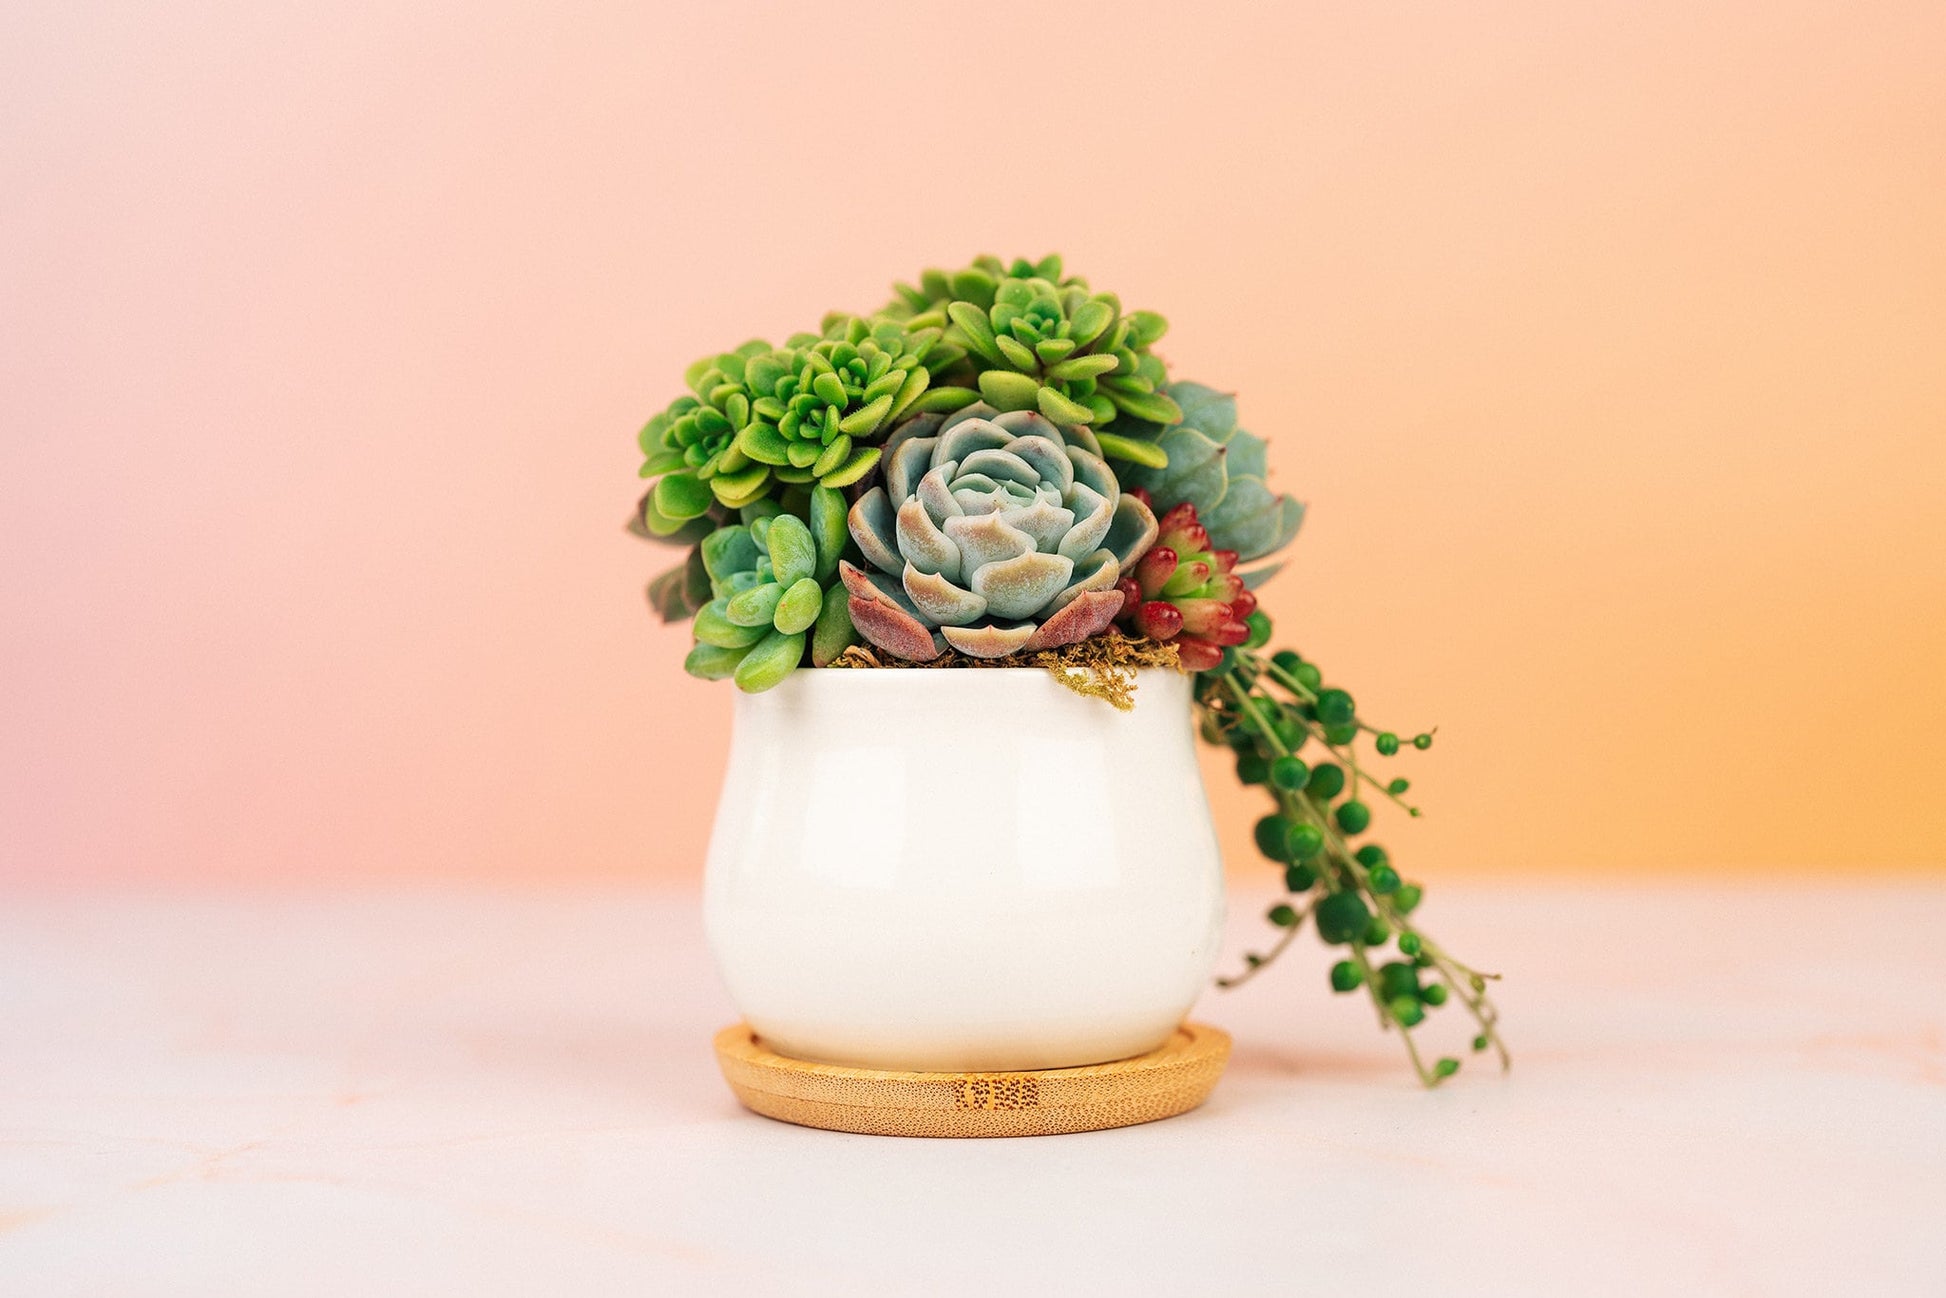 Mini Succulent Pot of Gold Arrangement Planter | Client Gift, Party Favor, Birthday, House Warming Gift for Plant Lovers | Gift for Mom